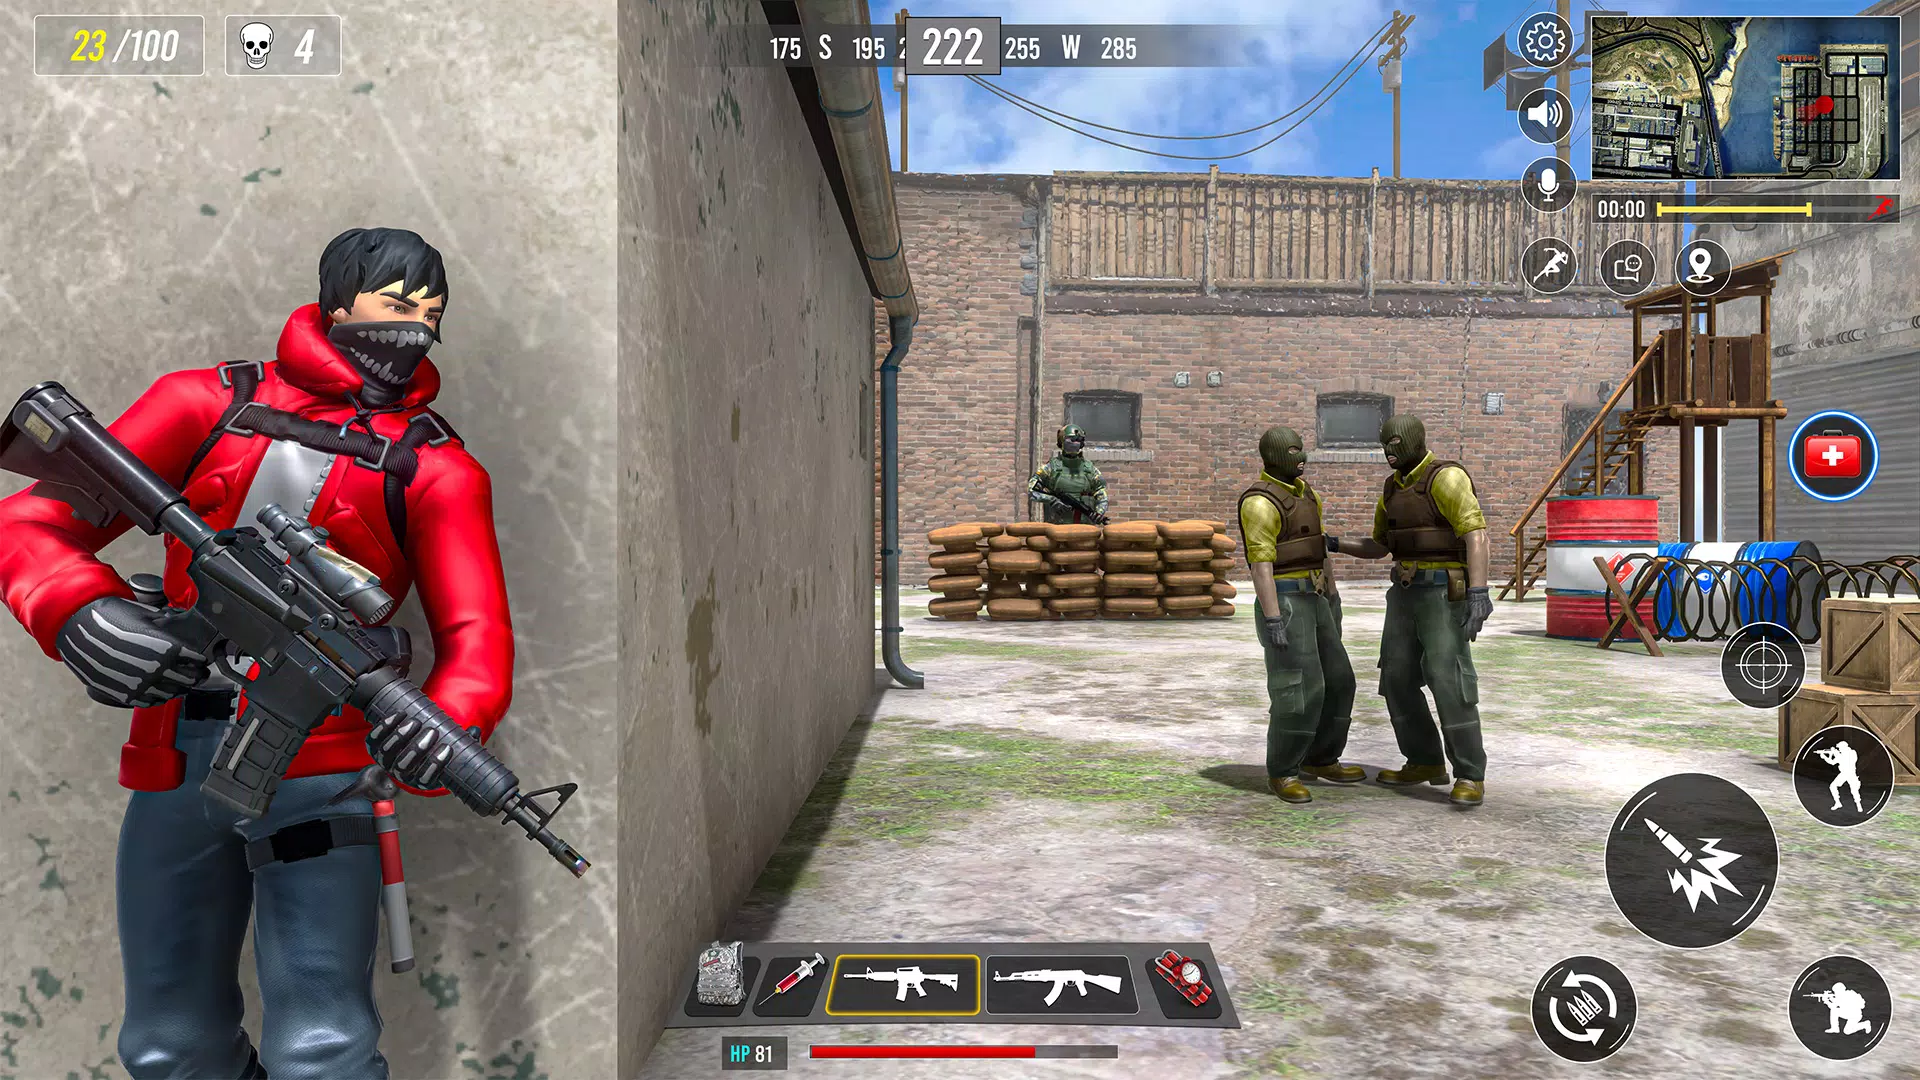 Play FPS Encounter Shooting Games Online for Free on PC & Mobile